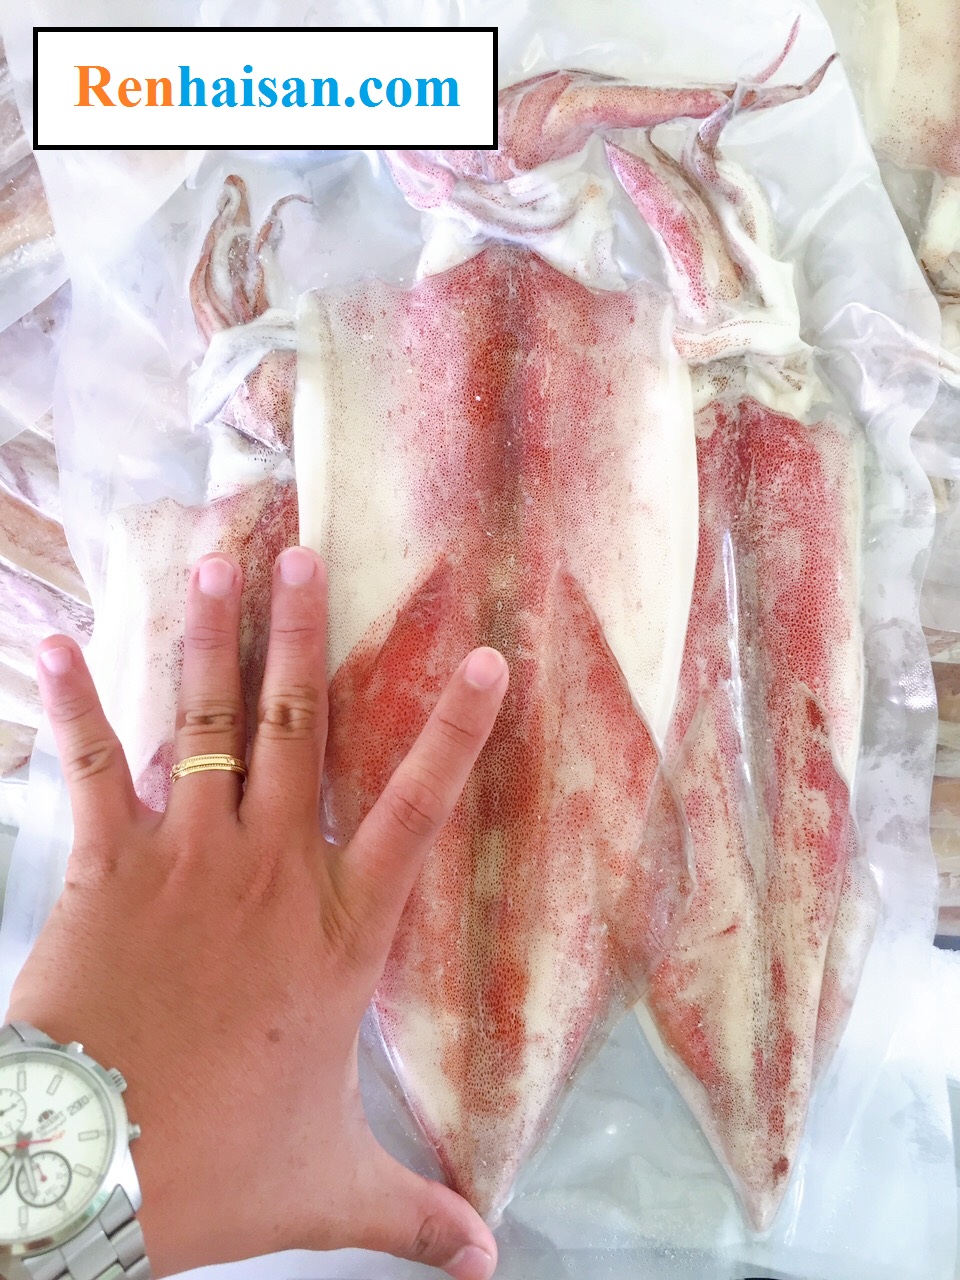 Mực một nắng - size (6 con/kg)